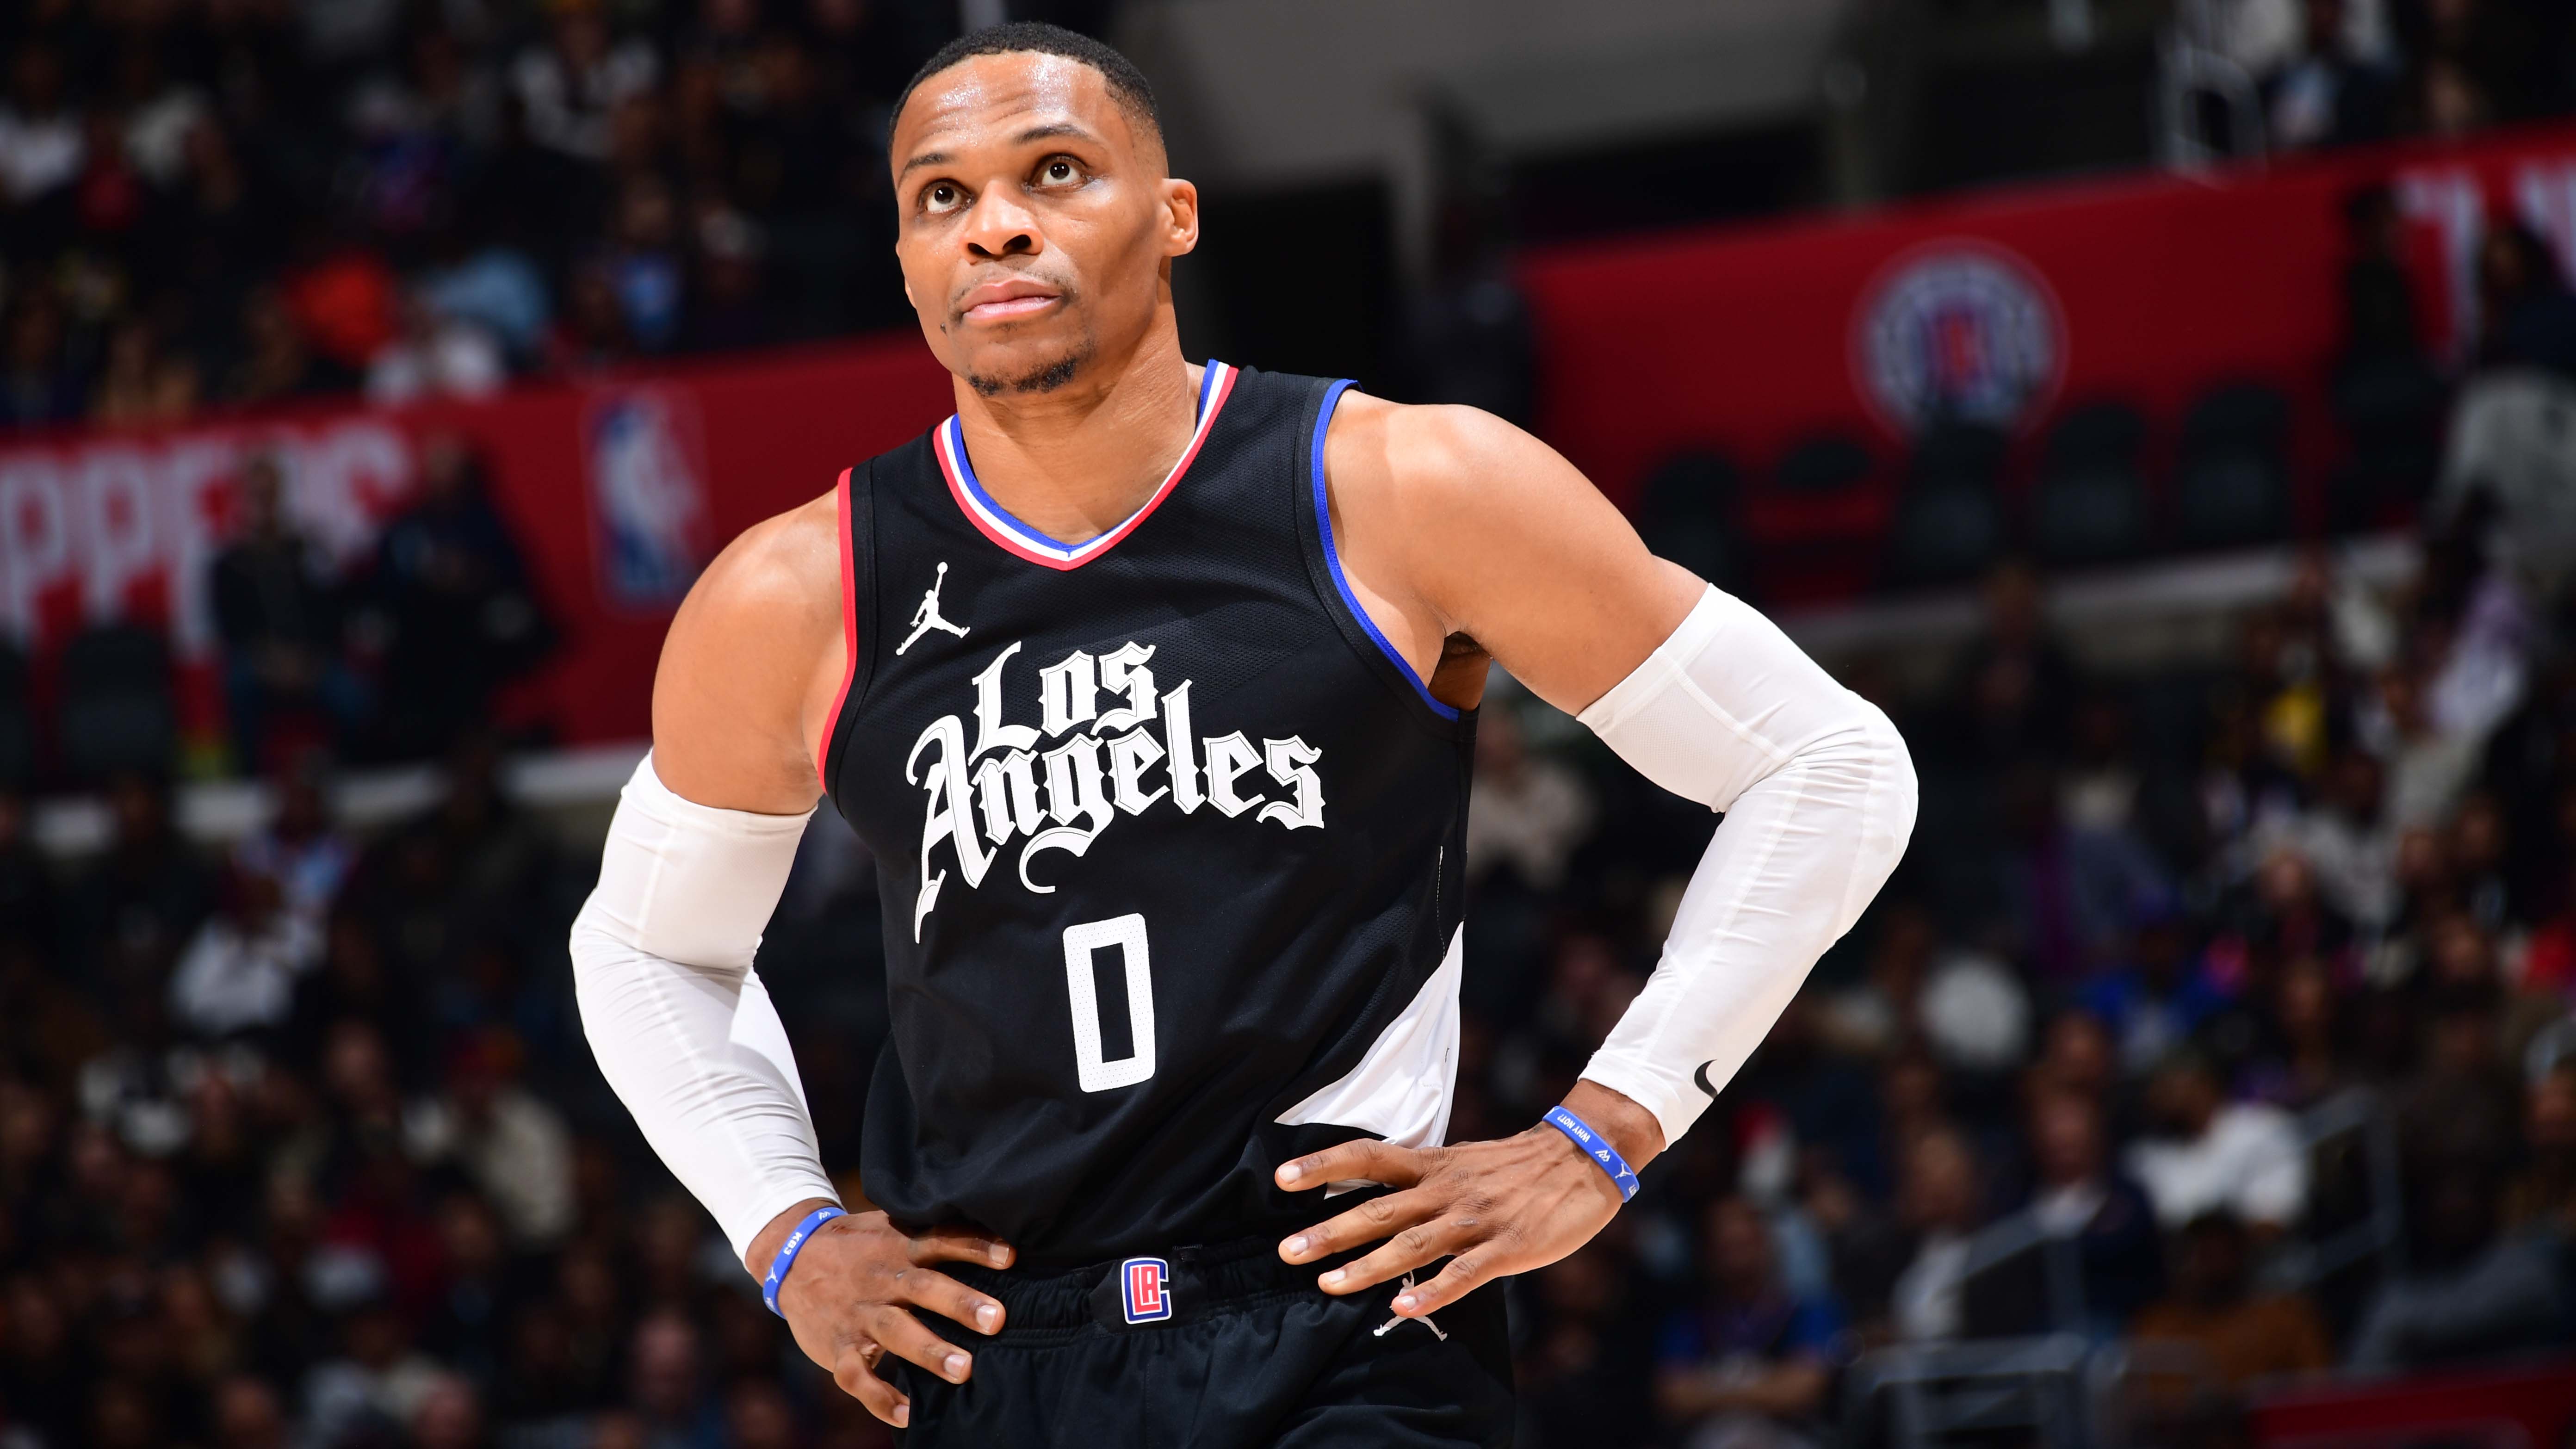 Clippers trade Russell Westbrook to Jazz, former MVP will join Nuggets after buyout: Report